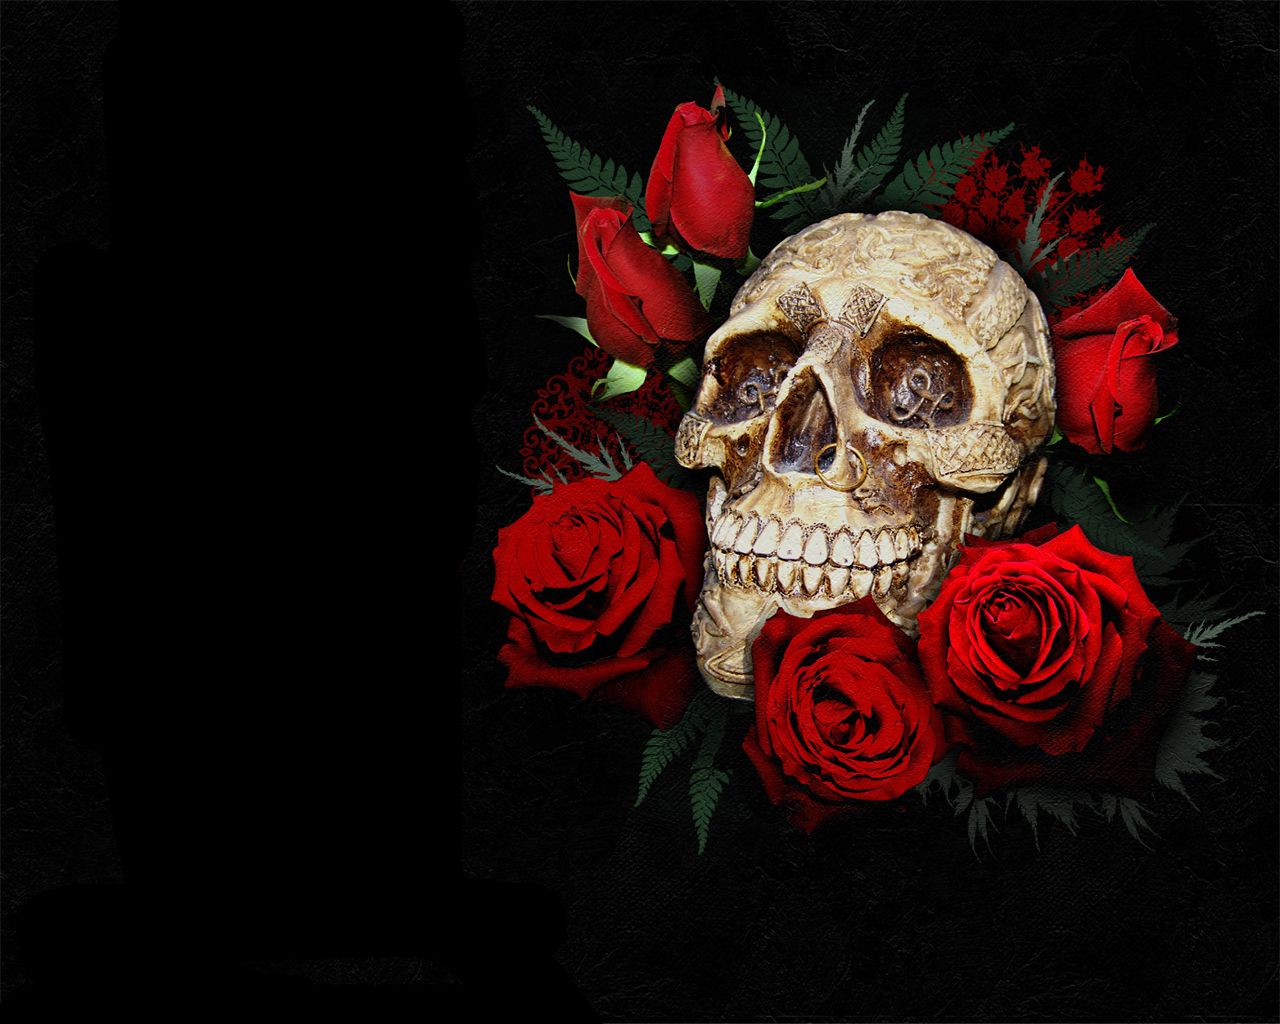 Skull Maybe Slightly Too Realistic But Nice Roses And Good